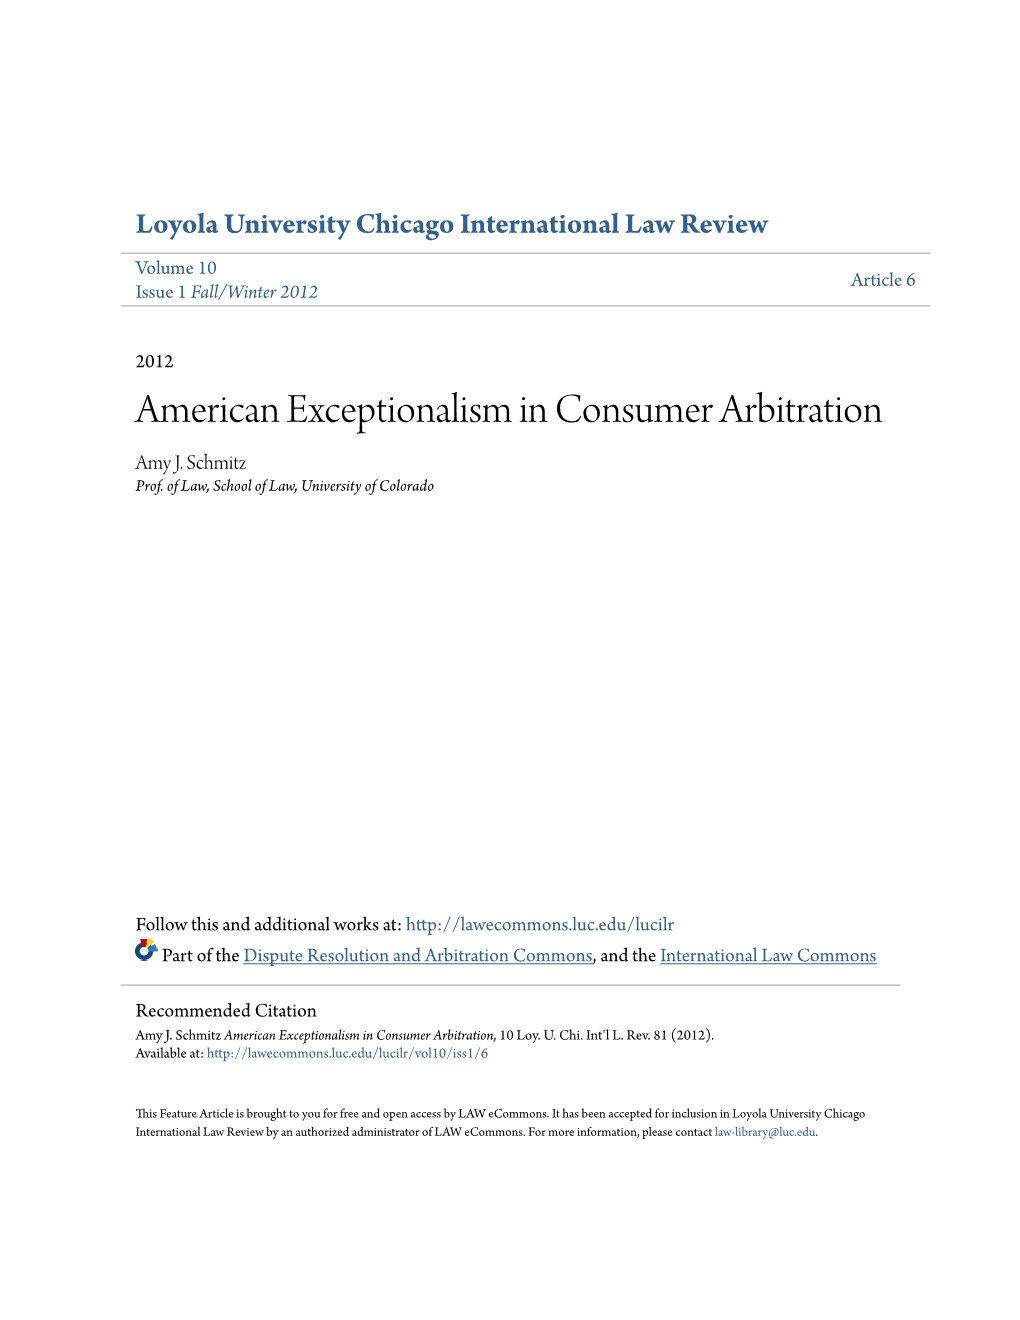 American Exceptionalism in Consumer Arbitration Amy J